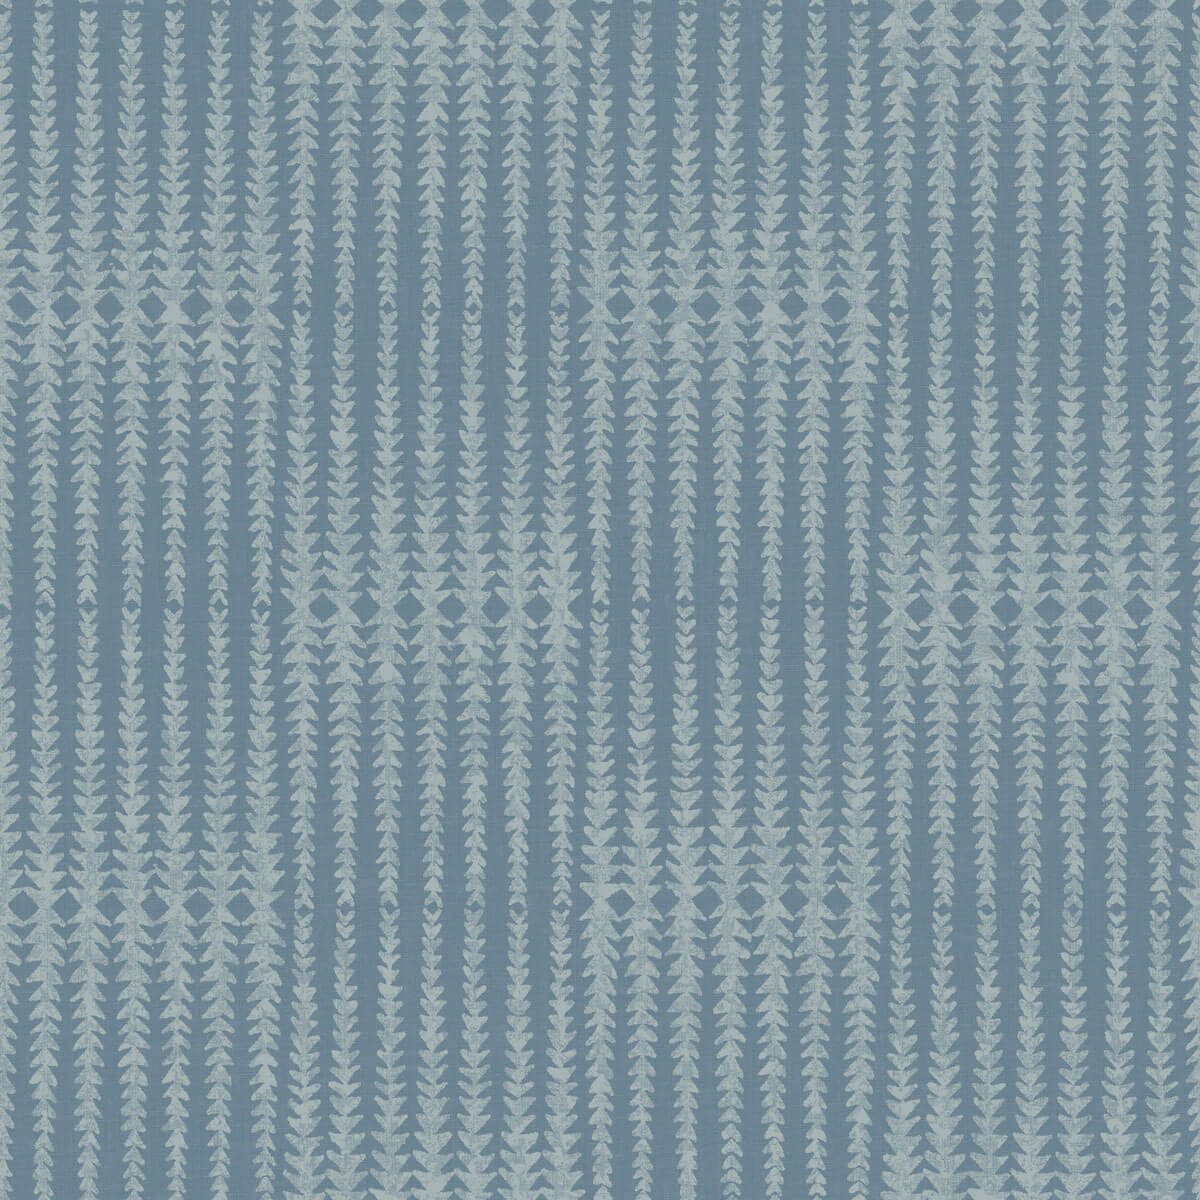 Magnolia Home Vantage Point Wallpaper - SAMPLE SWATCH ONLY